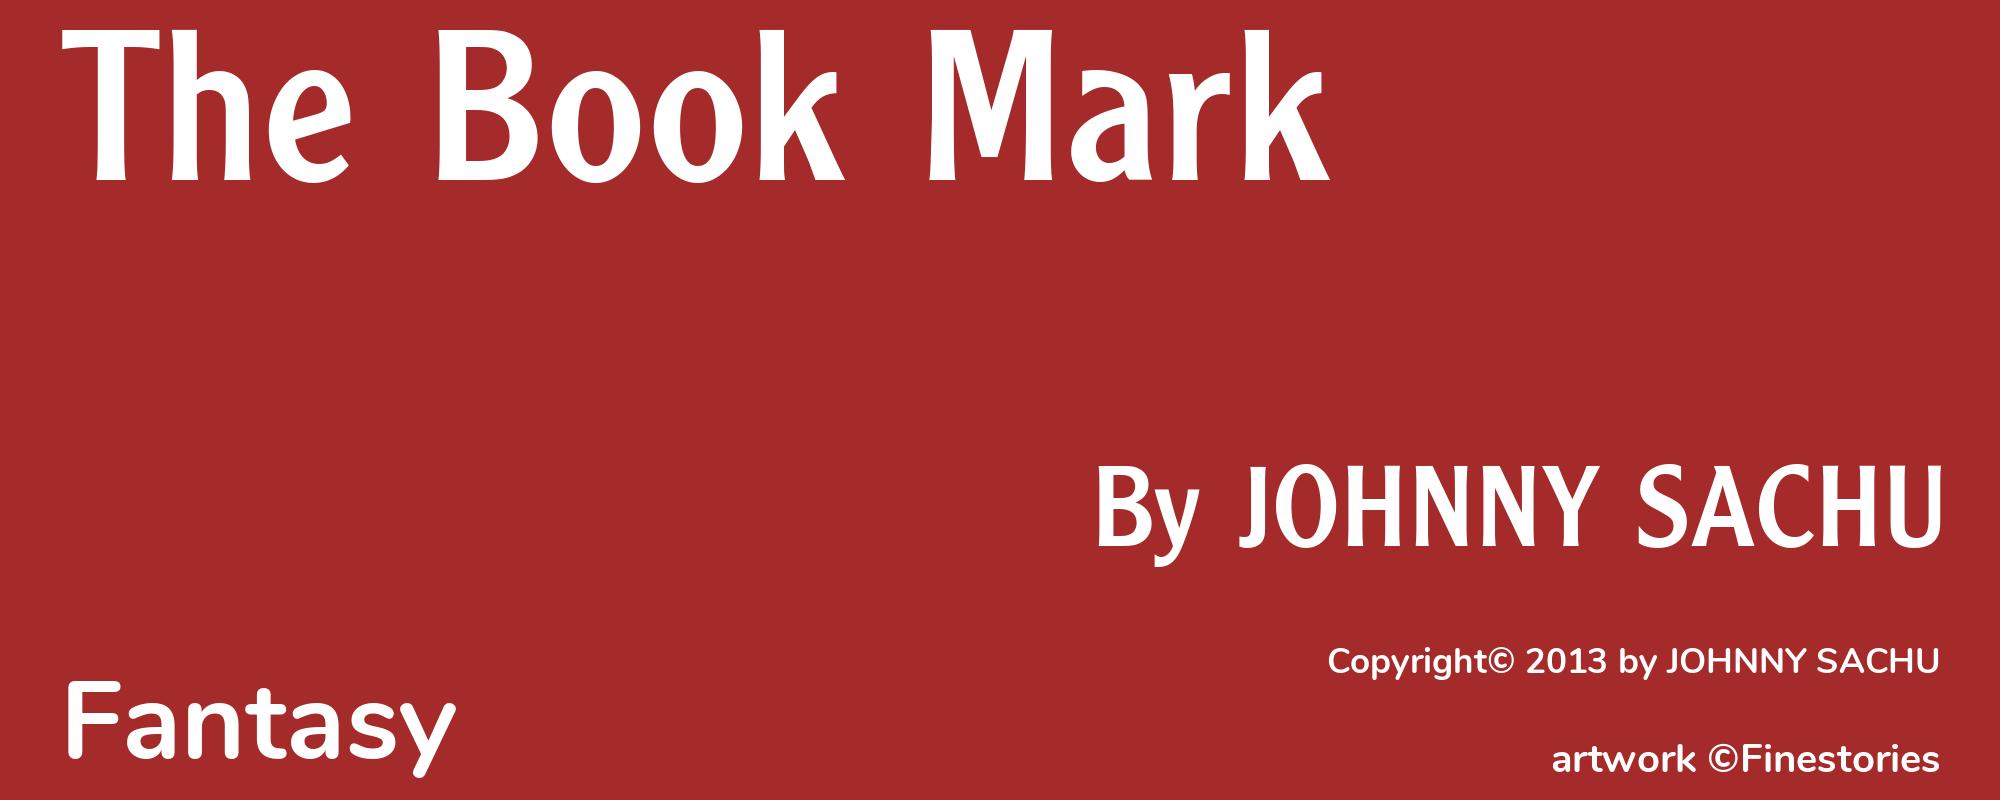 The Book Mark - Cover